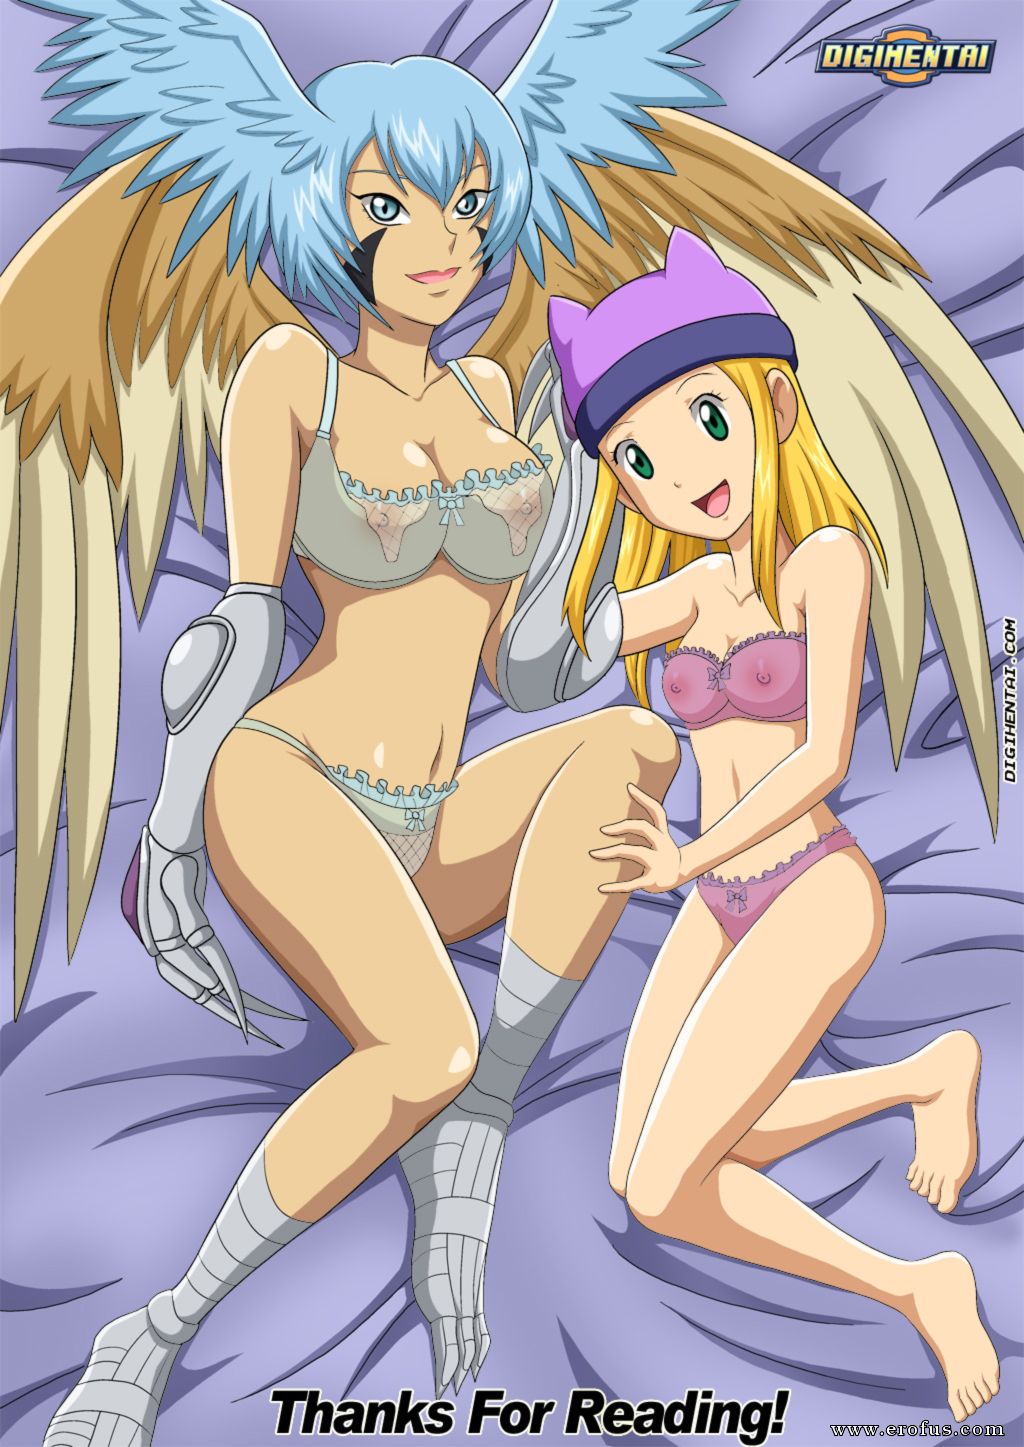 Digimon frontier boobs and porn comics